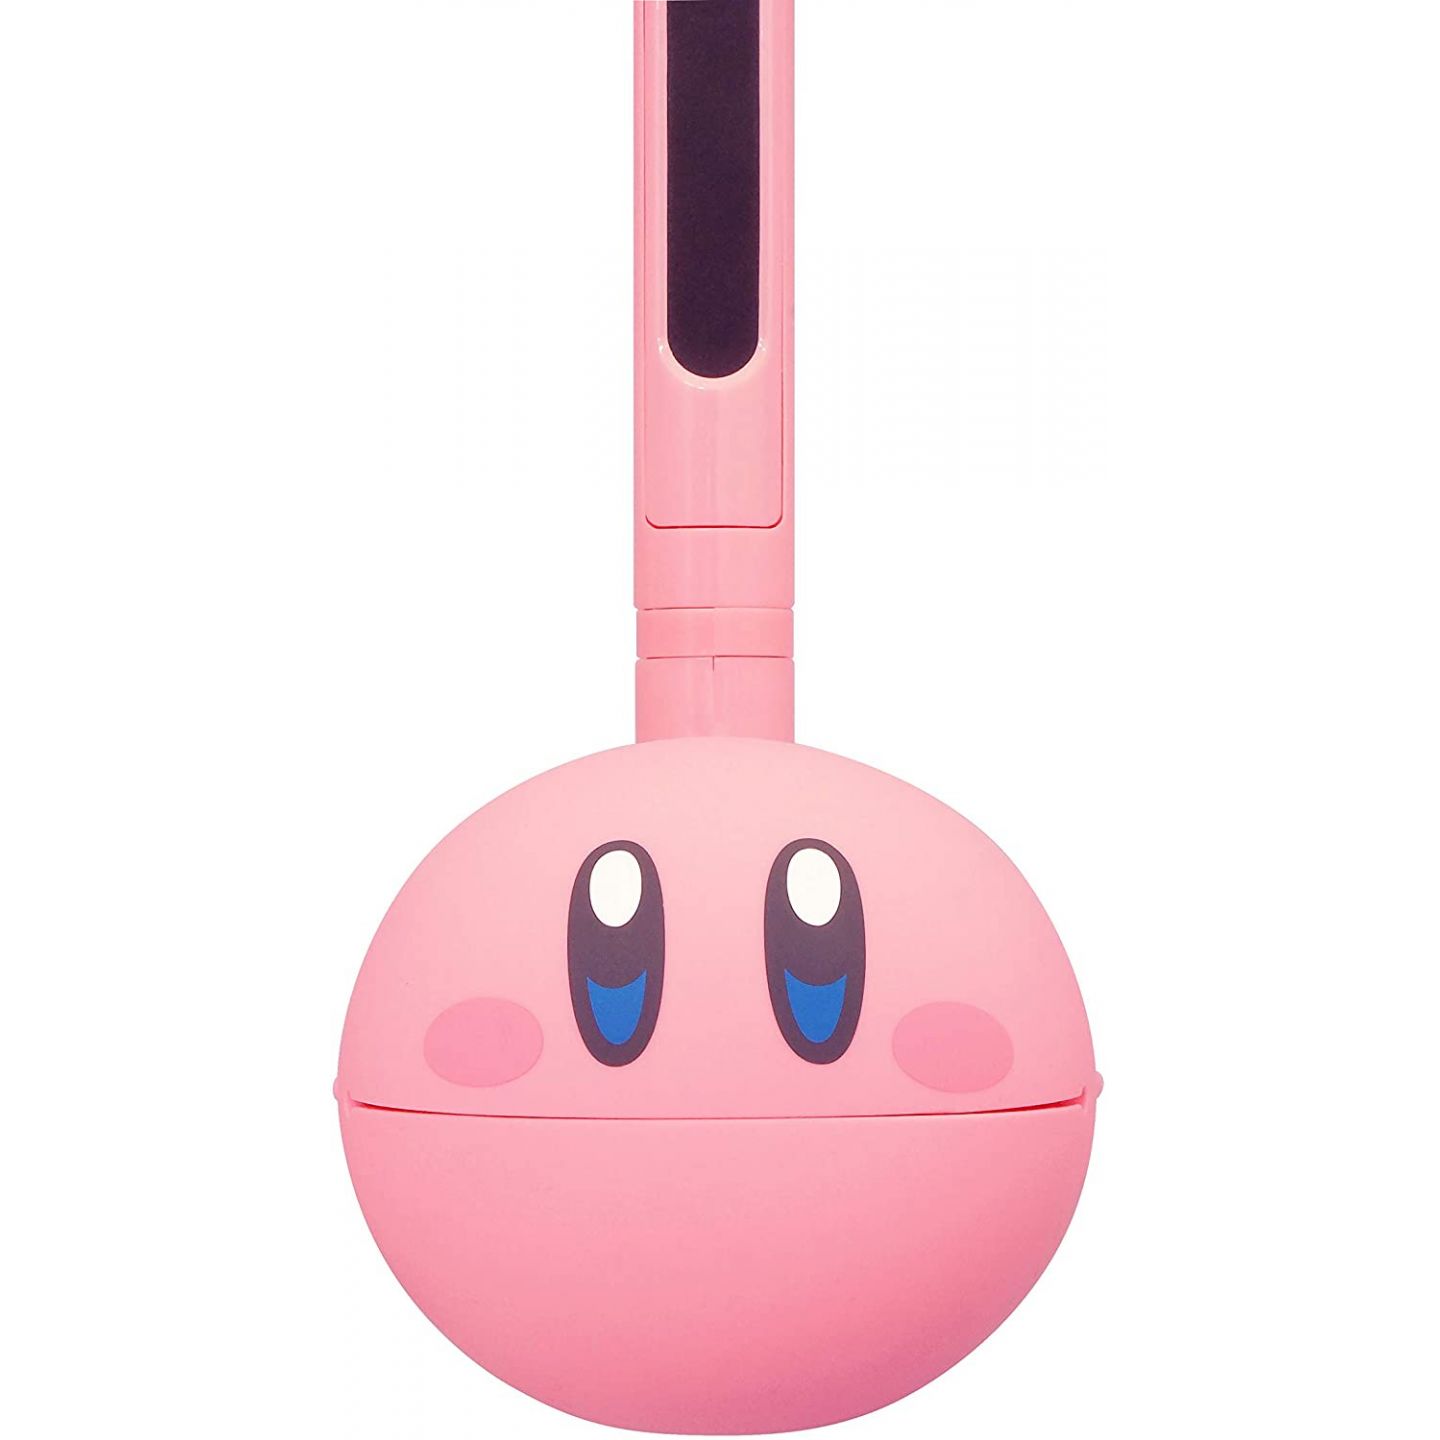 New Kirby Otamatone Instruments Are Headed To Japan, And They're